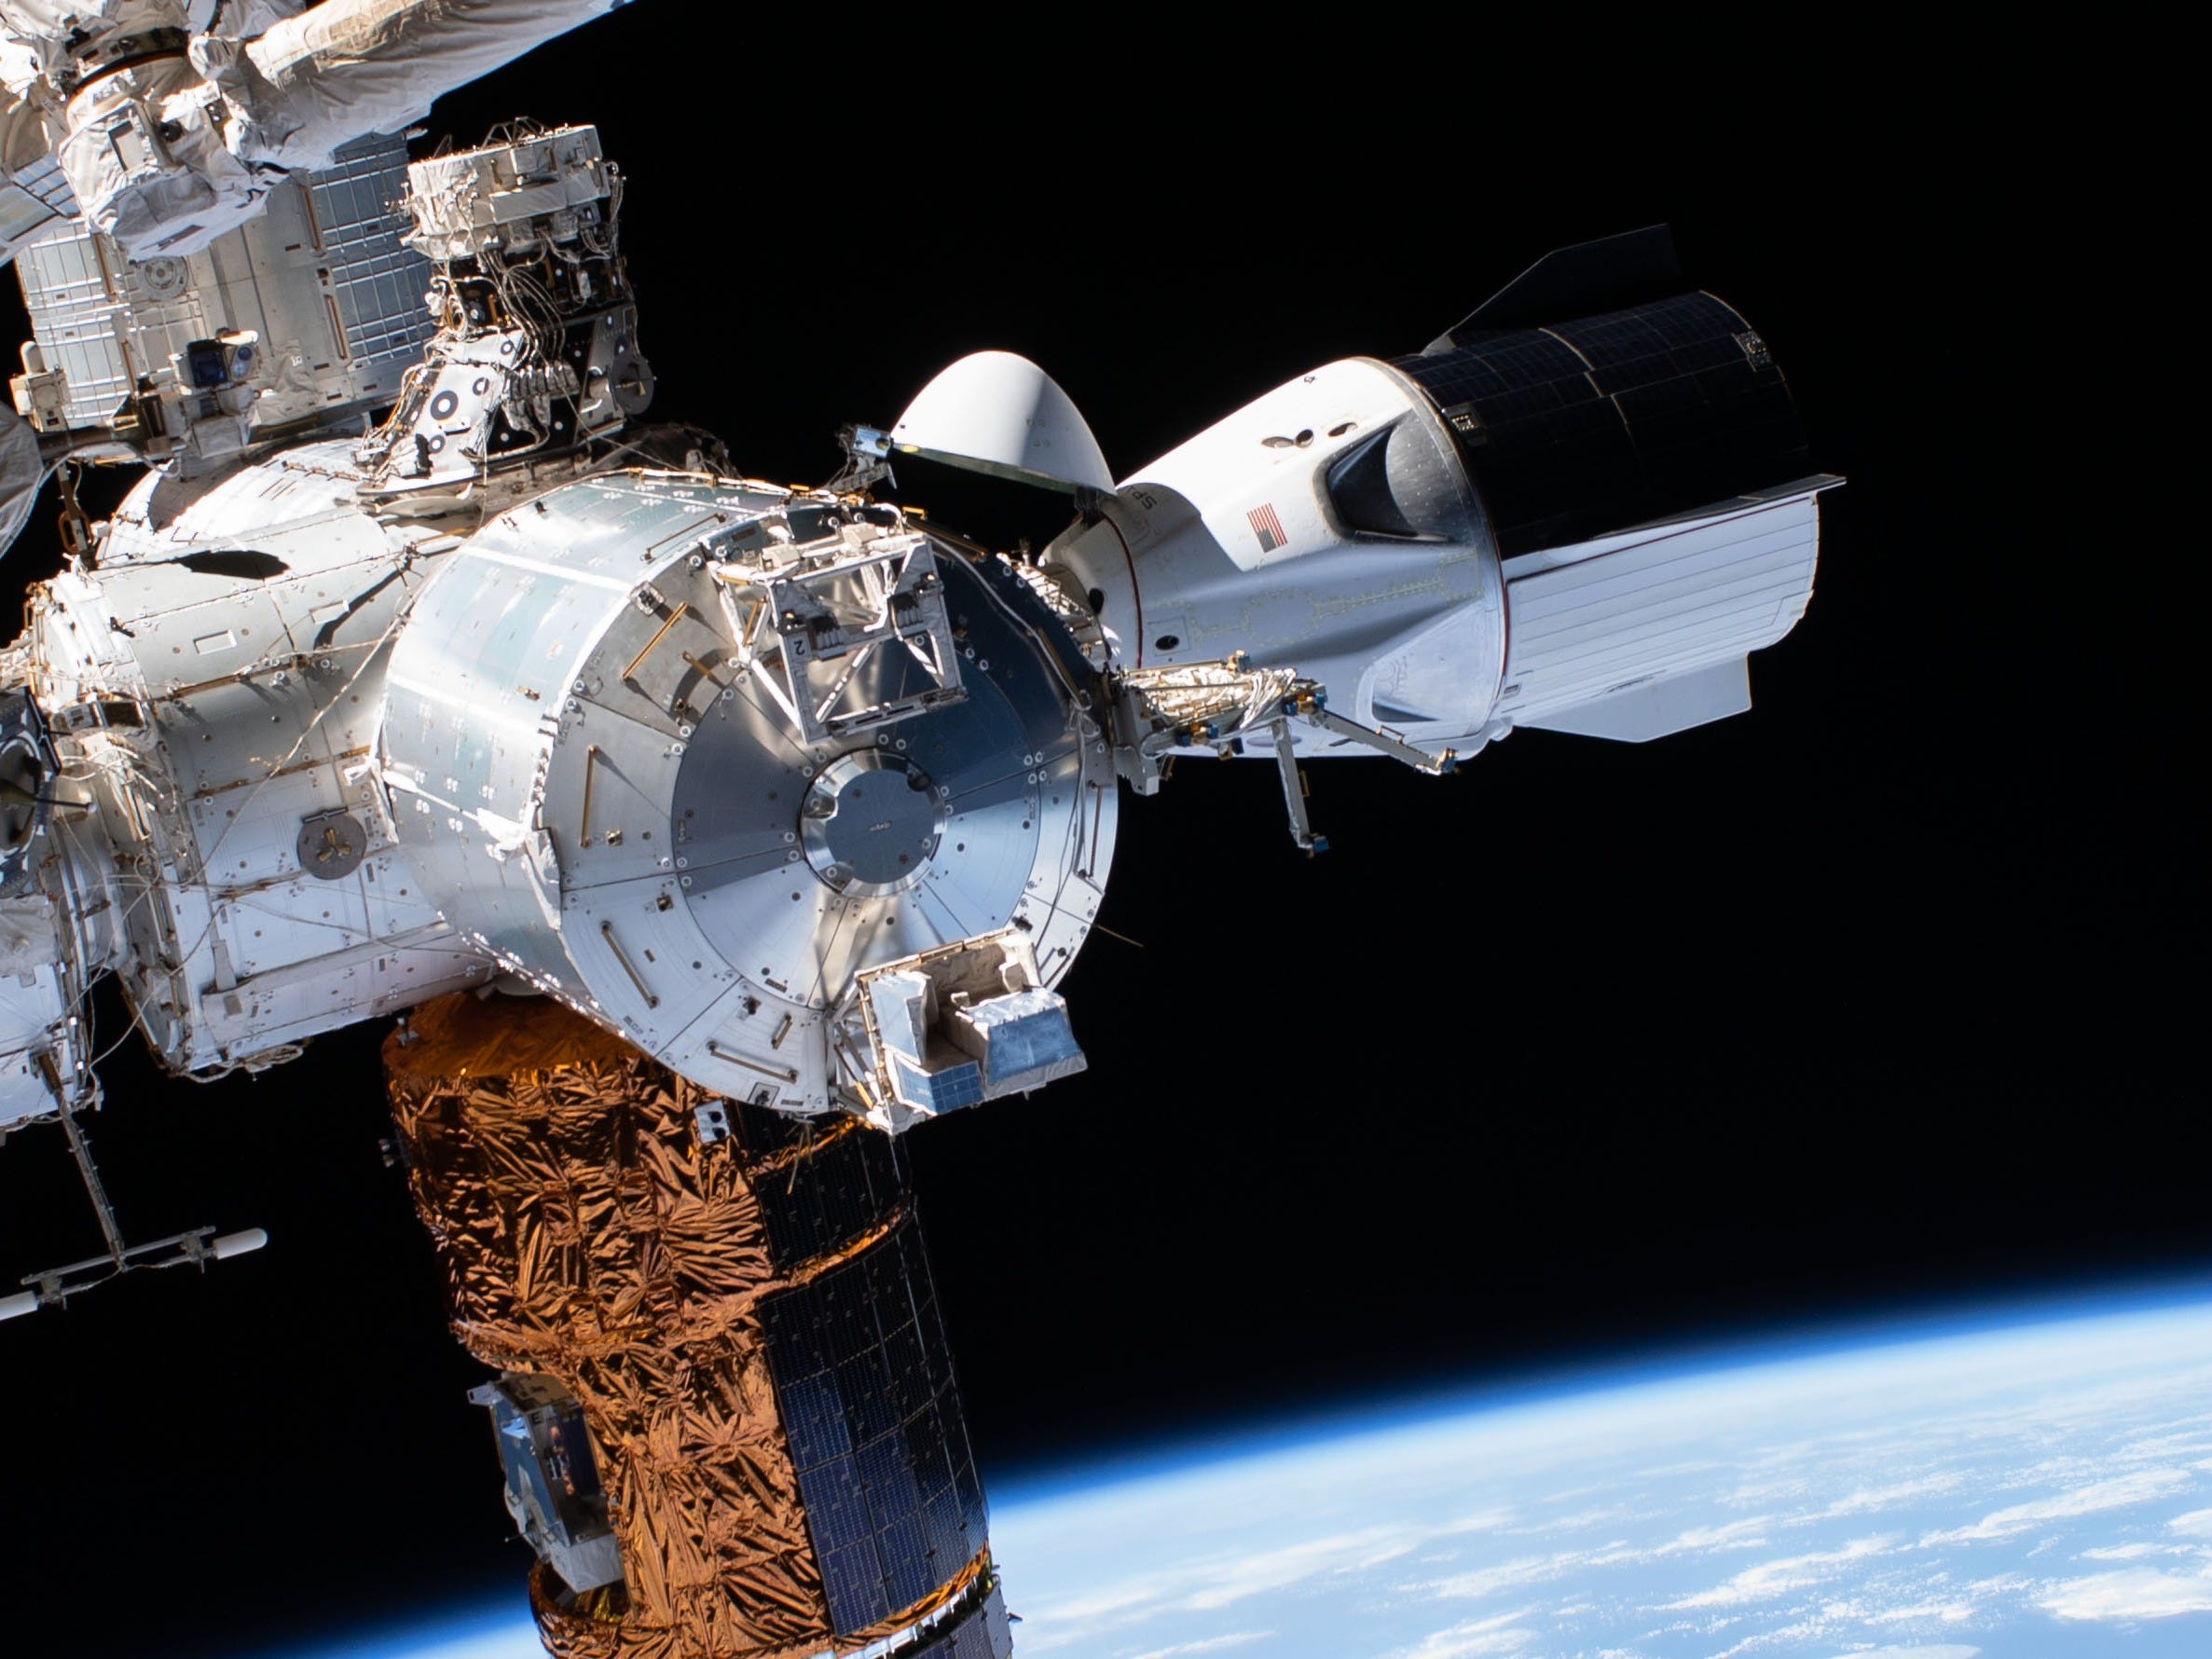 spacex crew dragon endeavour docked international space station iss july 1 2020 iss063e034054